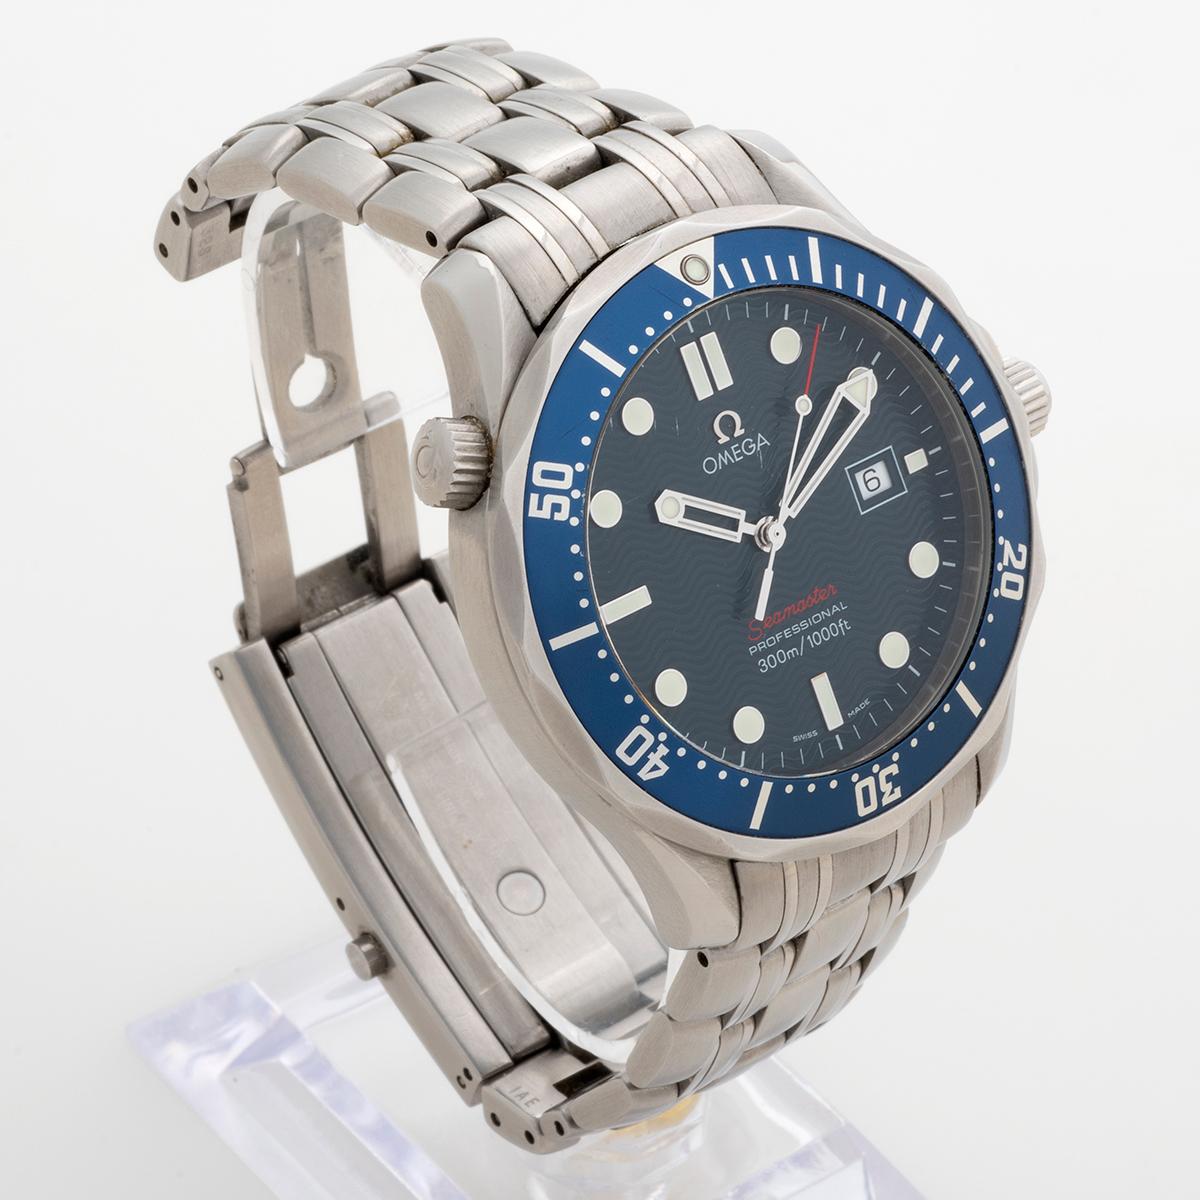 Our Omega Seamaster 300m professional divers watch with blue wave dial, is the final and upgrade series of quartz movement with 41.5mm full size stainless steel case and stainless steel bracelet; also known as the 